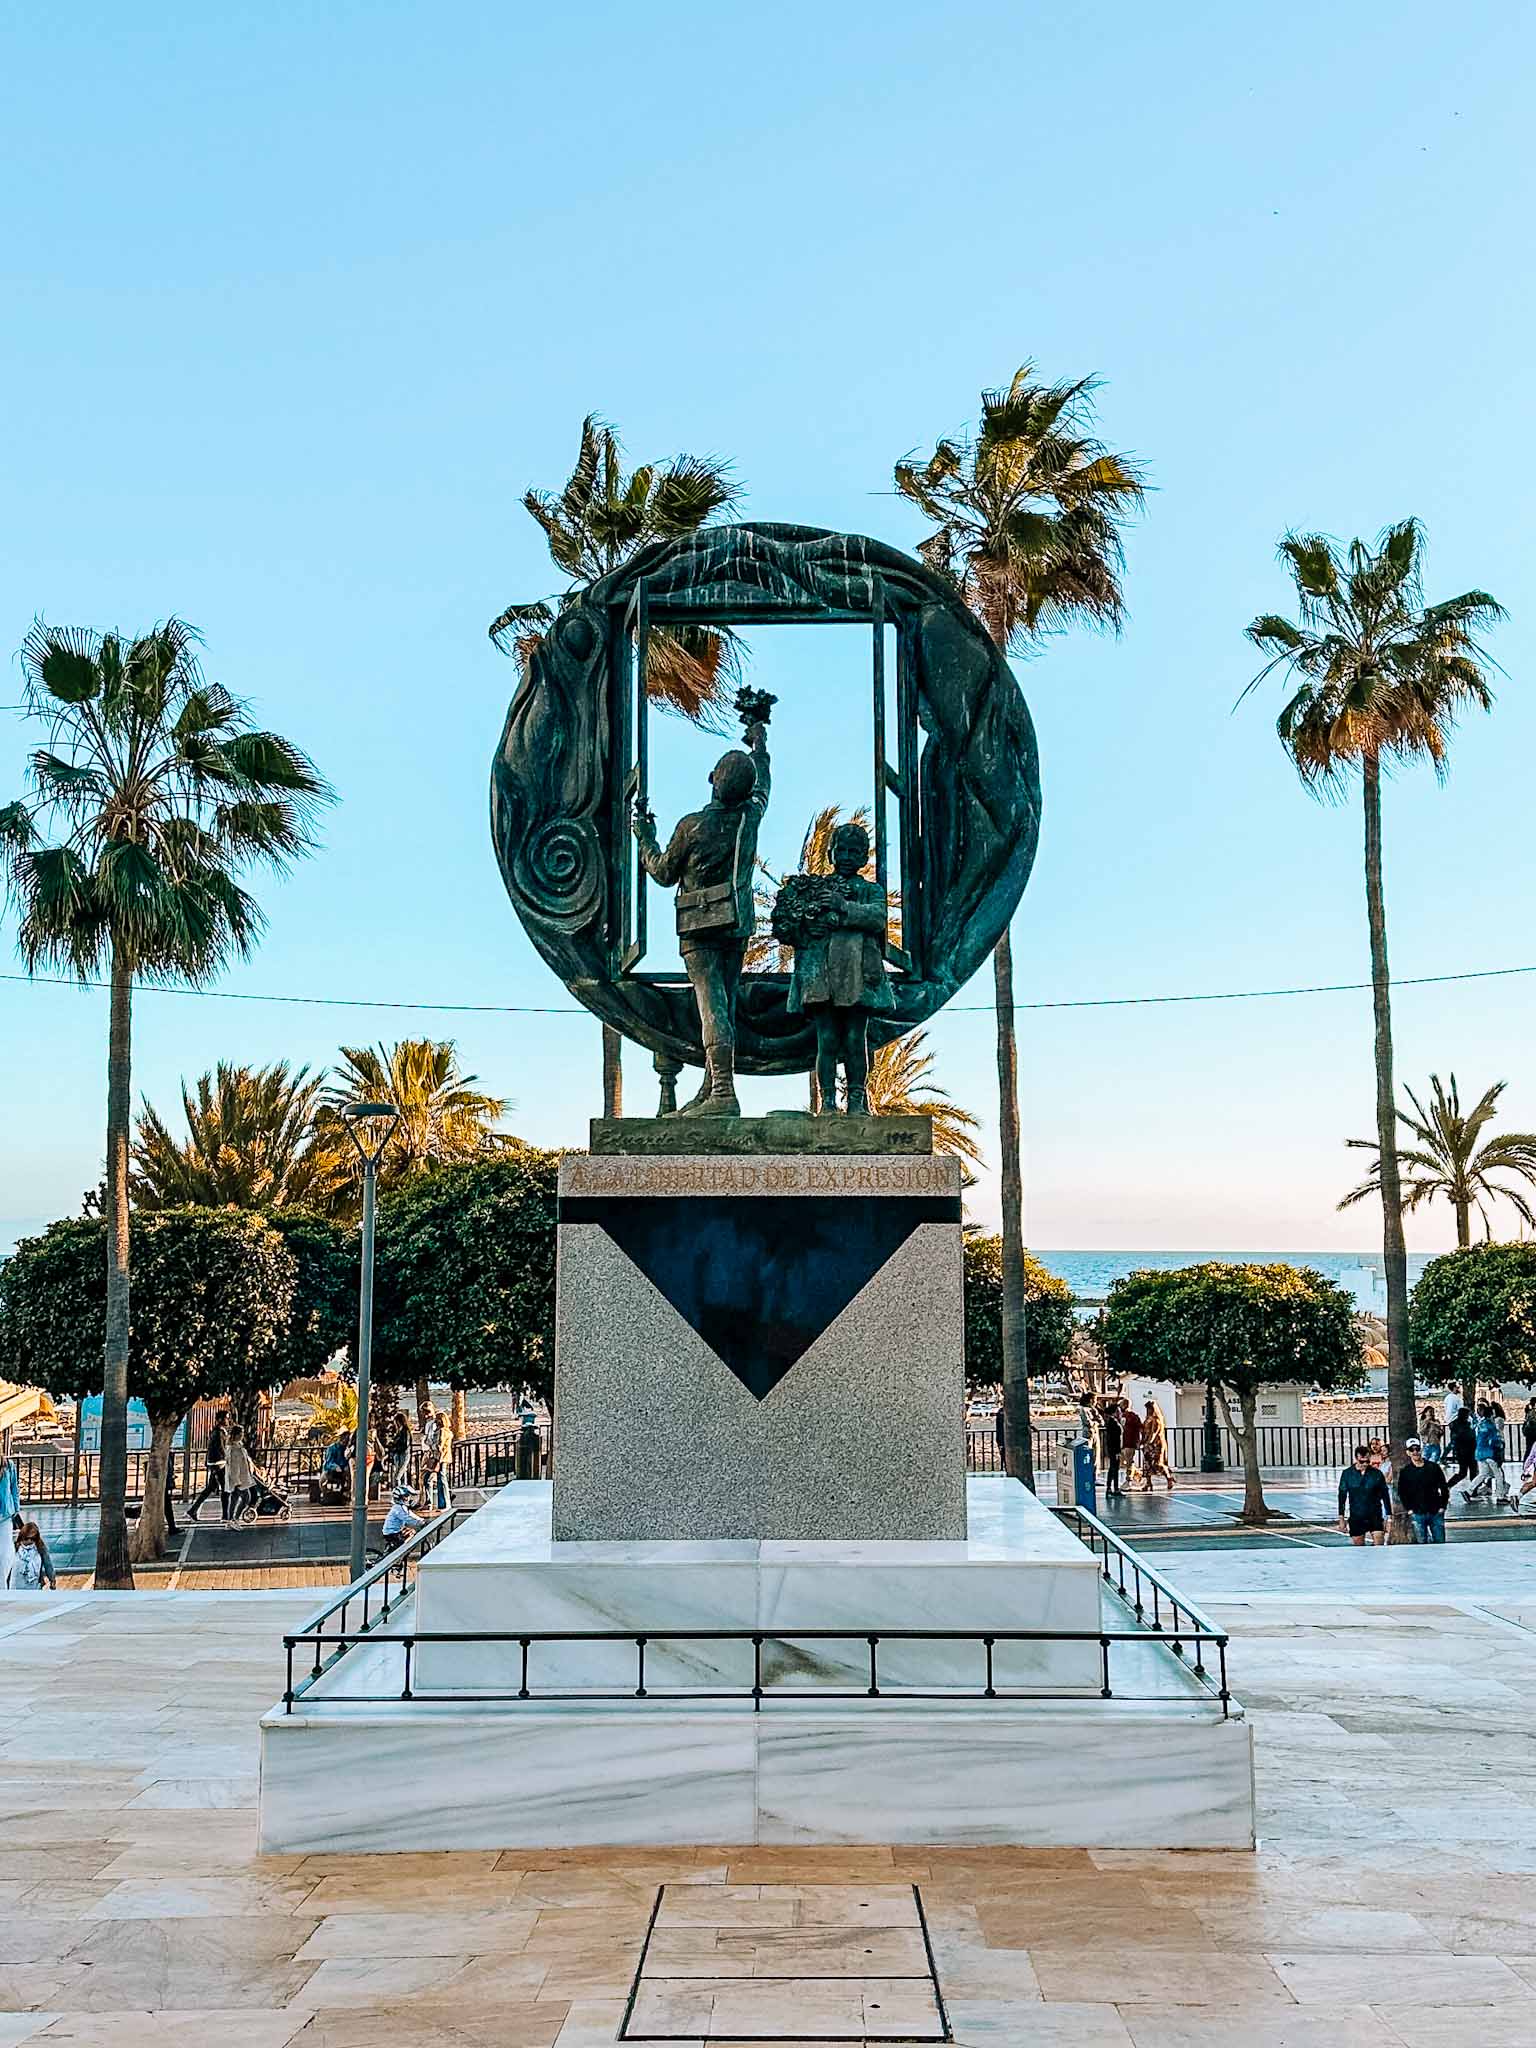 Best Instagram photo spots and things to do in Marbella Old Town, Spain - Salvador Dali sculptures